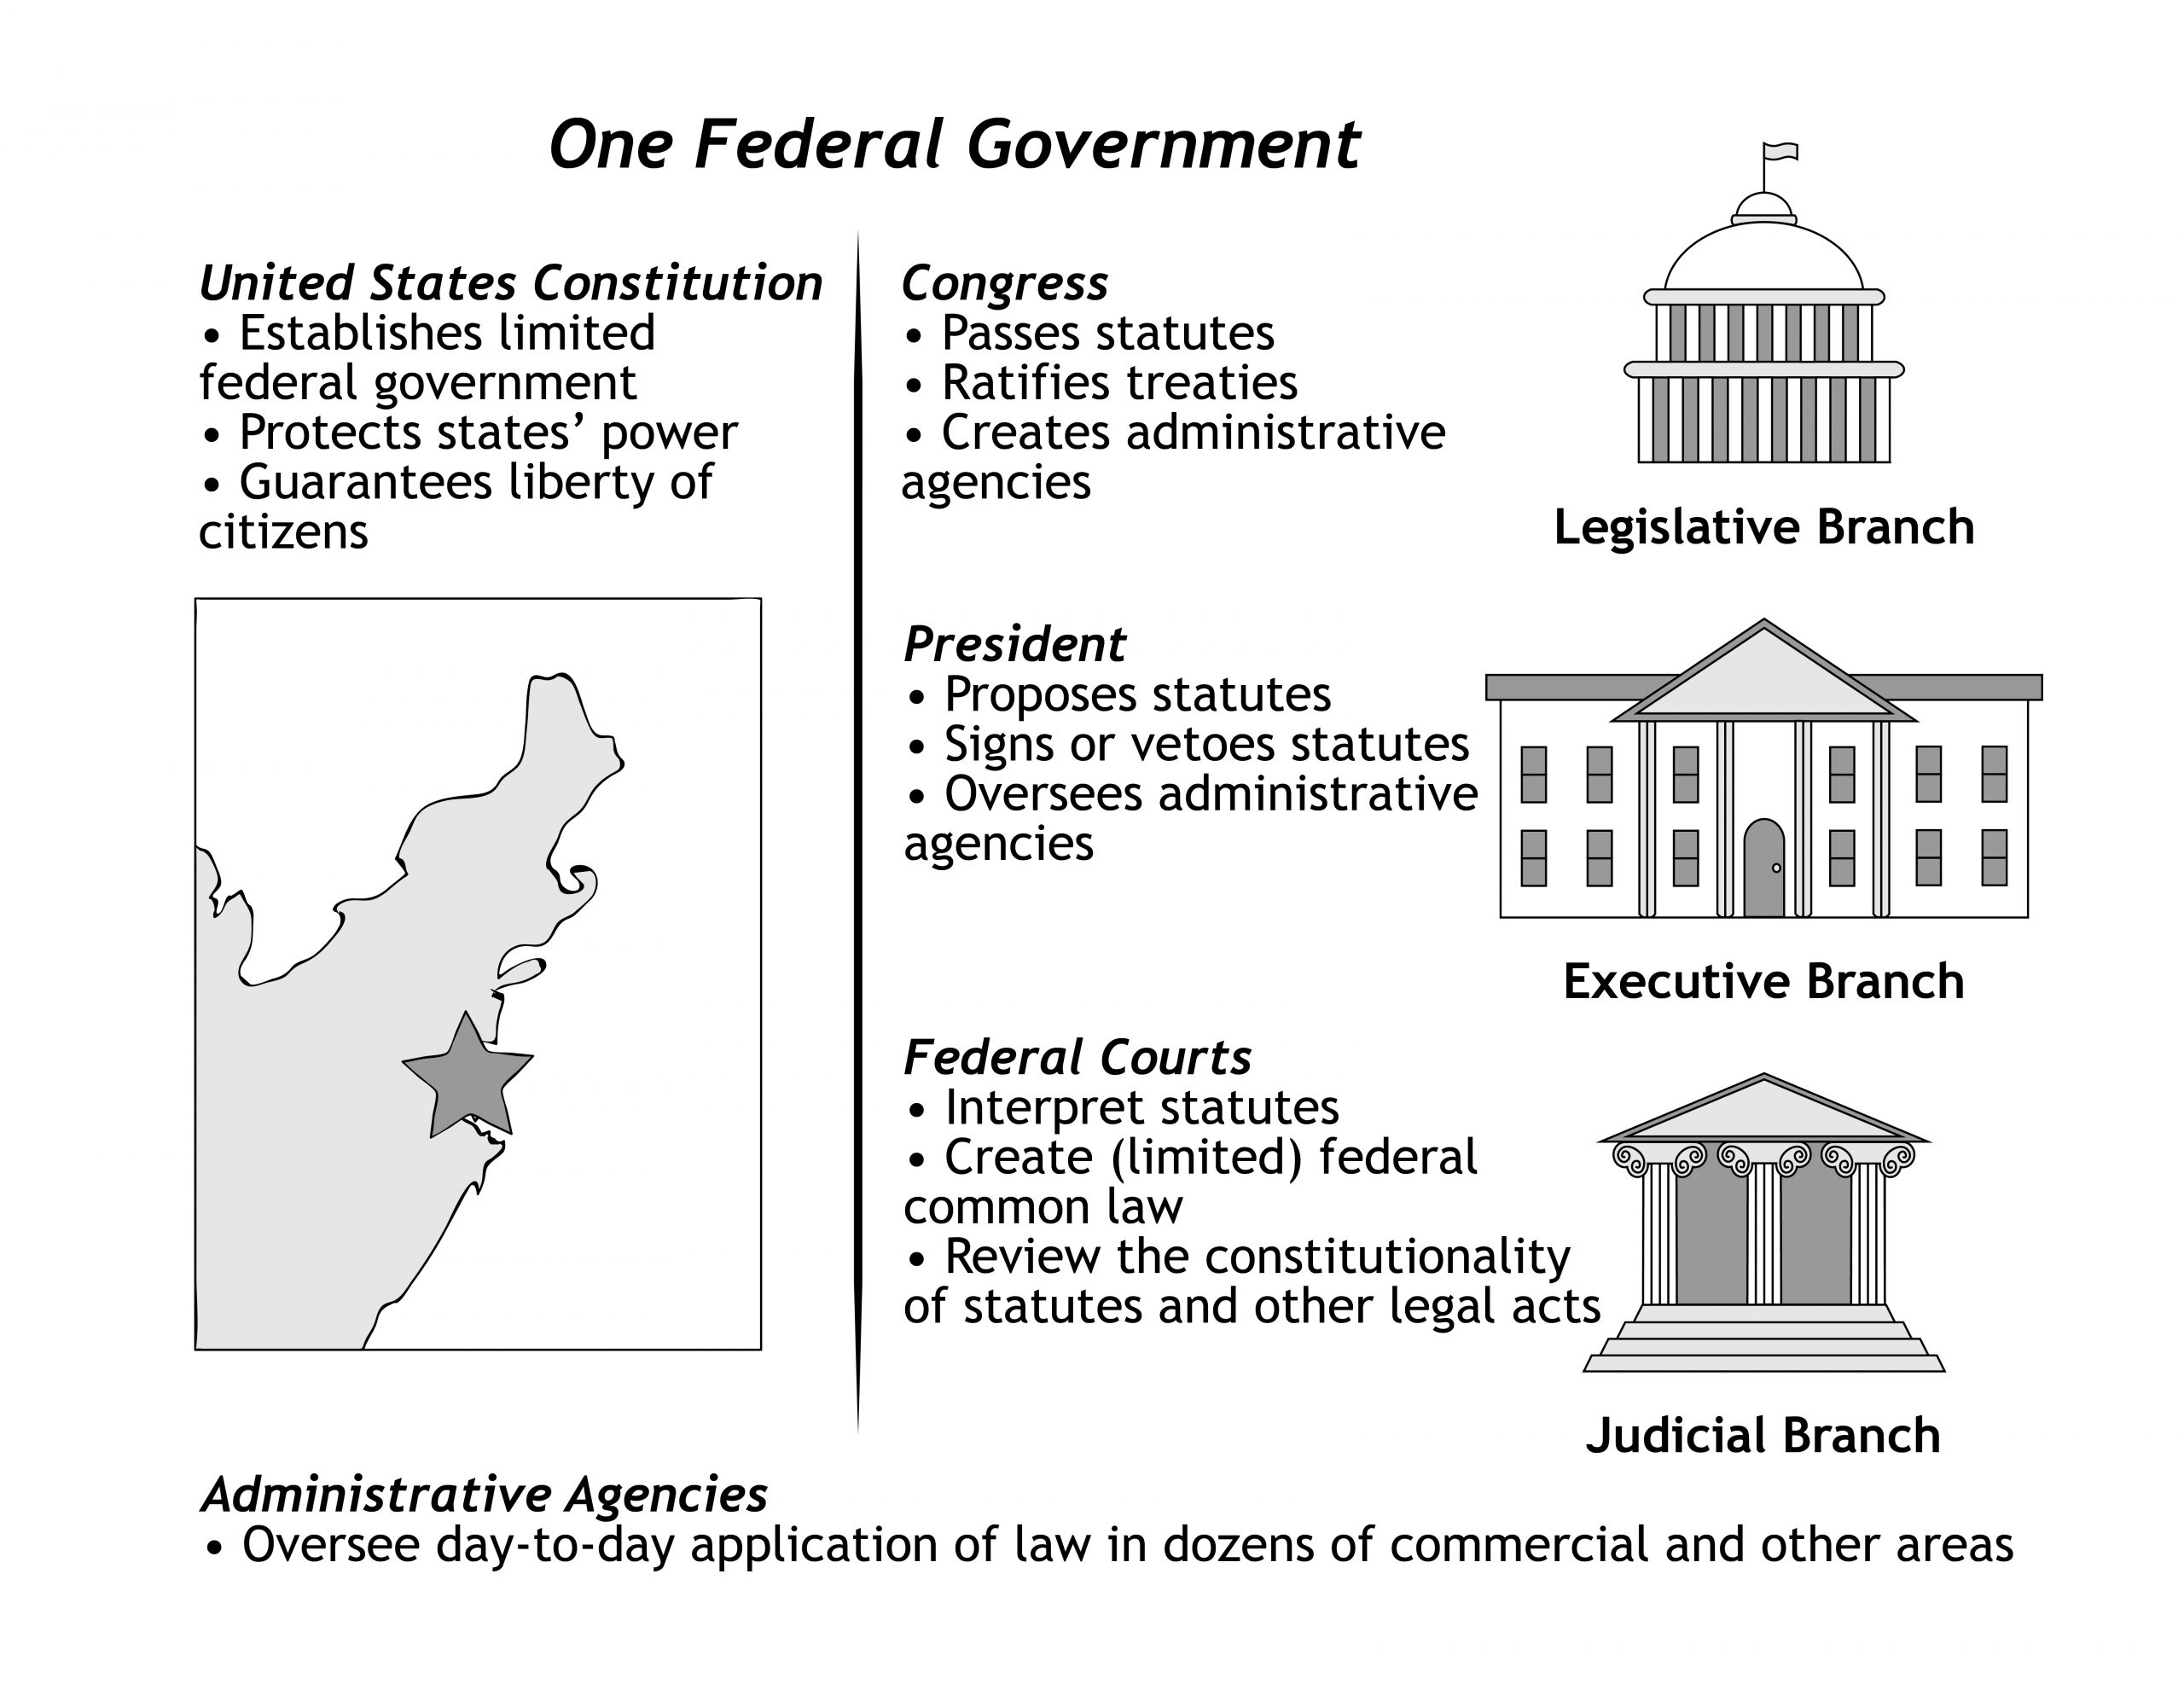 Graphic showing the responsibilities of each branch of the federal government